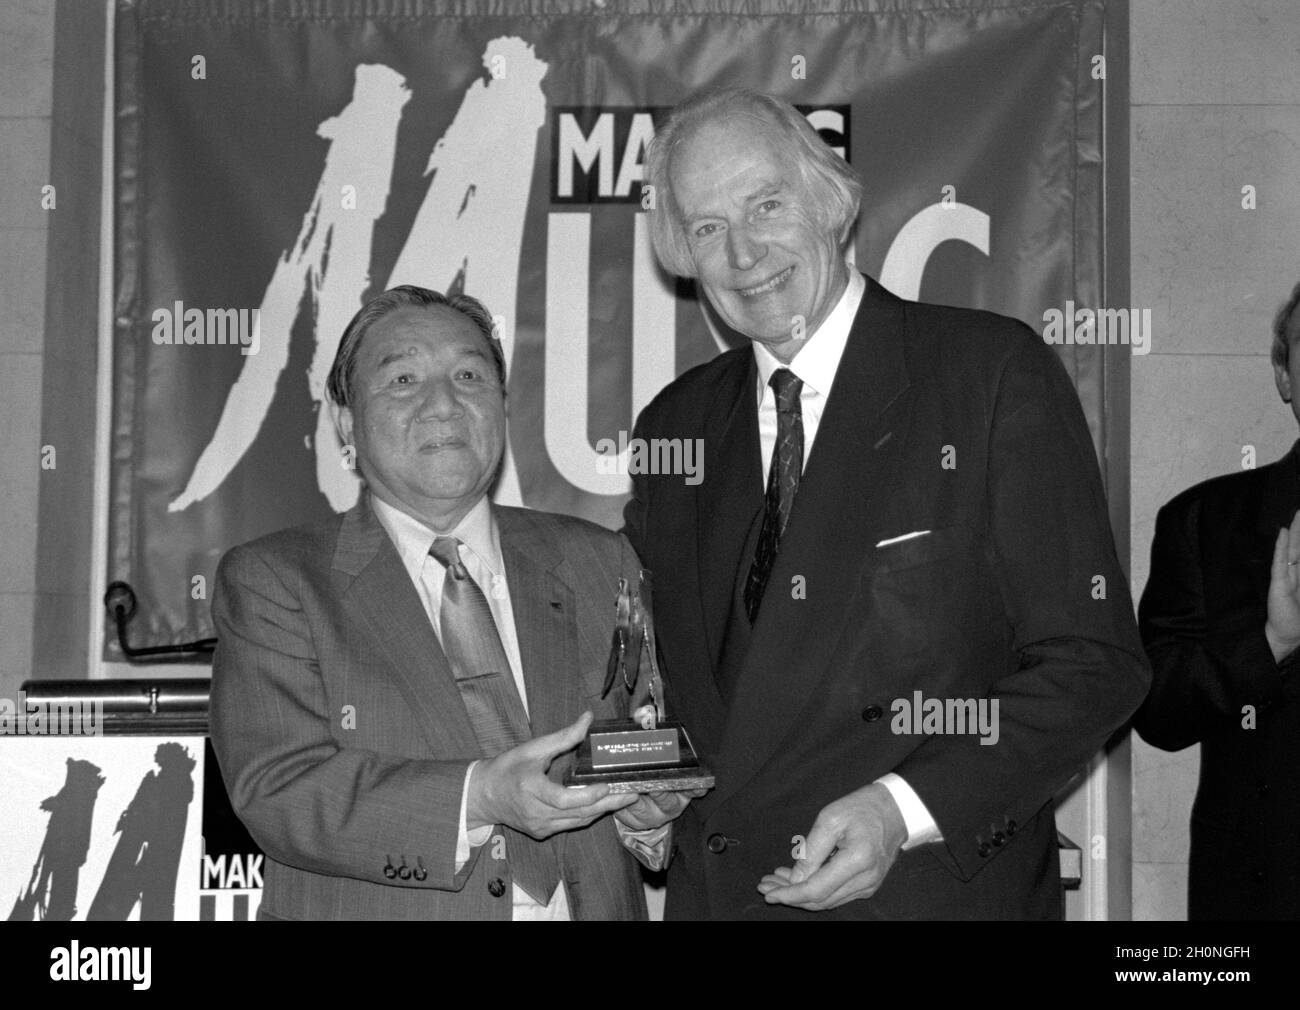 English record producer Sir George Martin, CBE (right) presenting an award to Ikutaro Kakehashi, founder of the Roland Corporation, at the Frankfurt Music Fair in Germany in 1994. Stock Photo